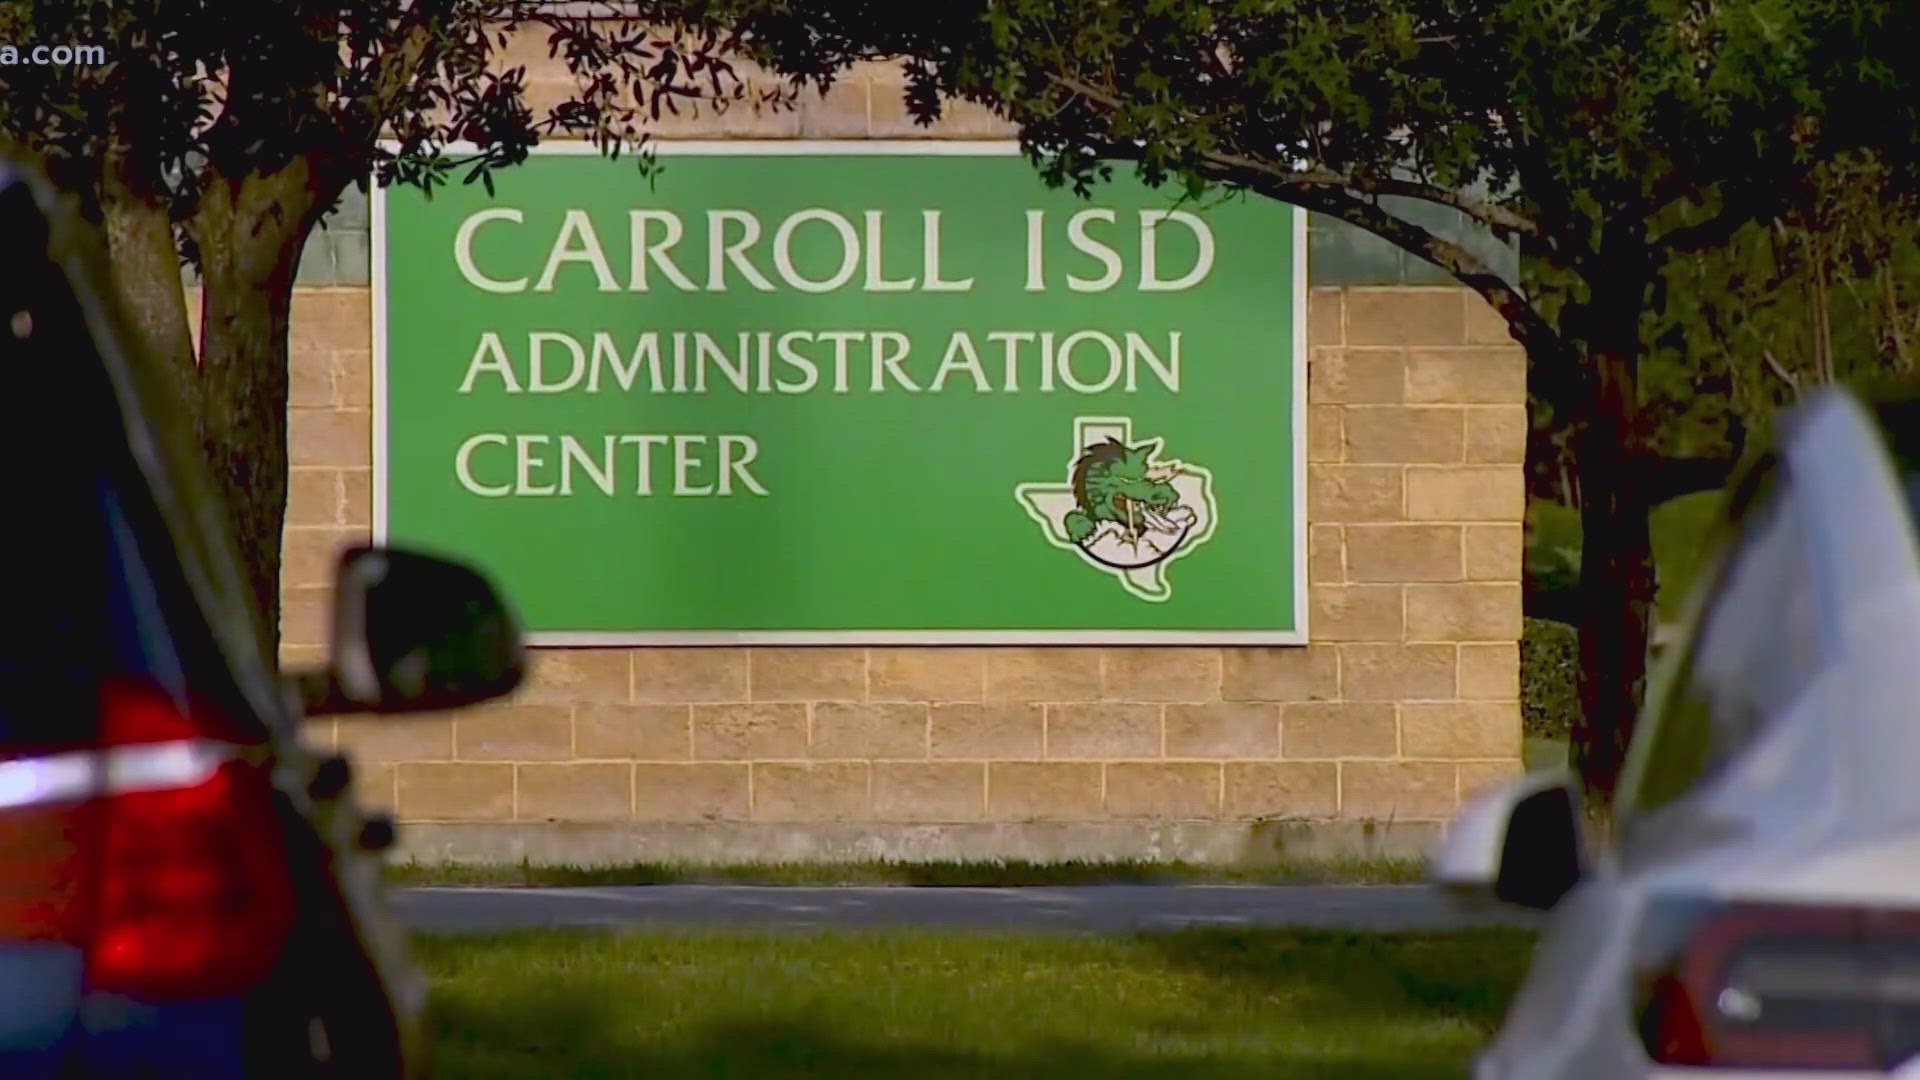 Carroll ISD trustees voted last week to move forward with the litigation.